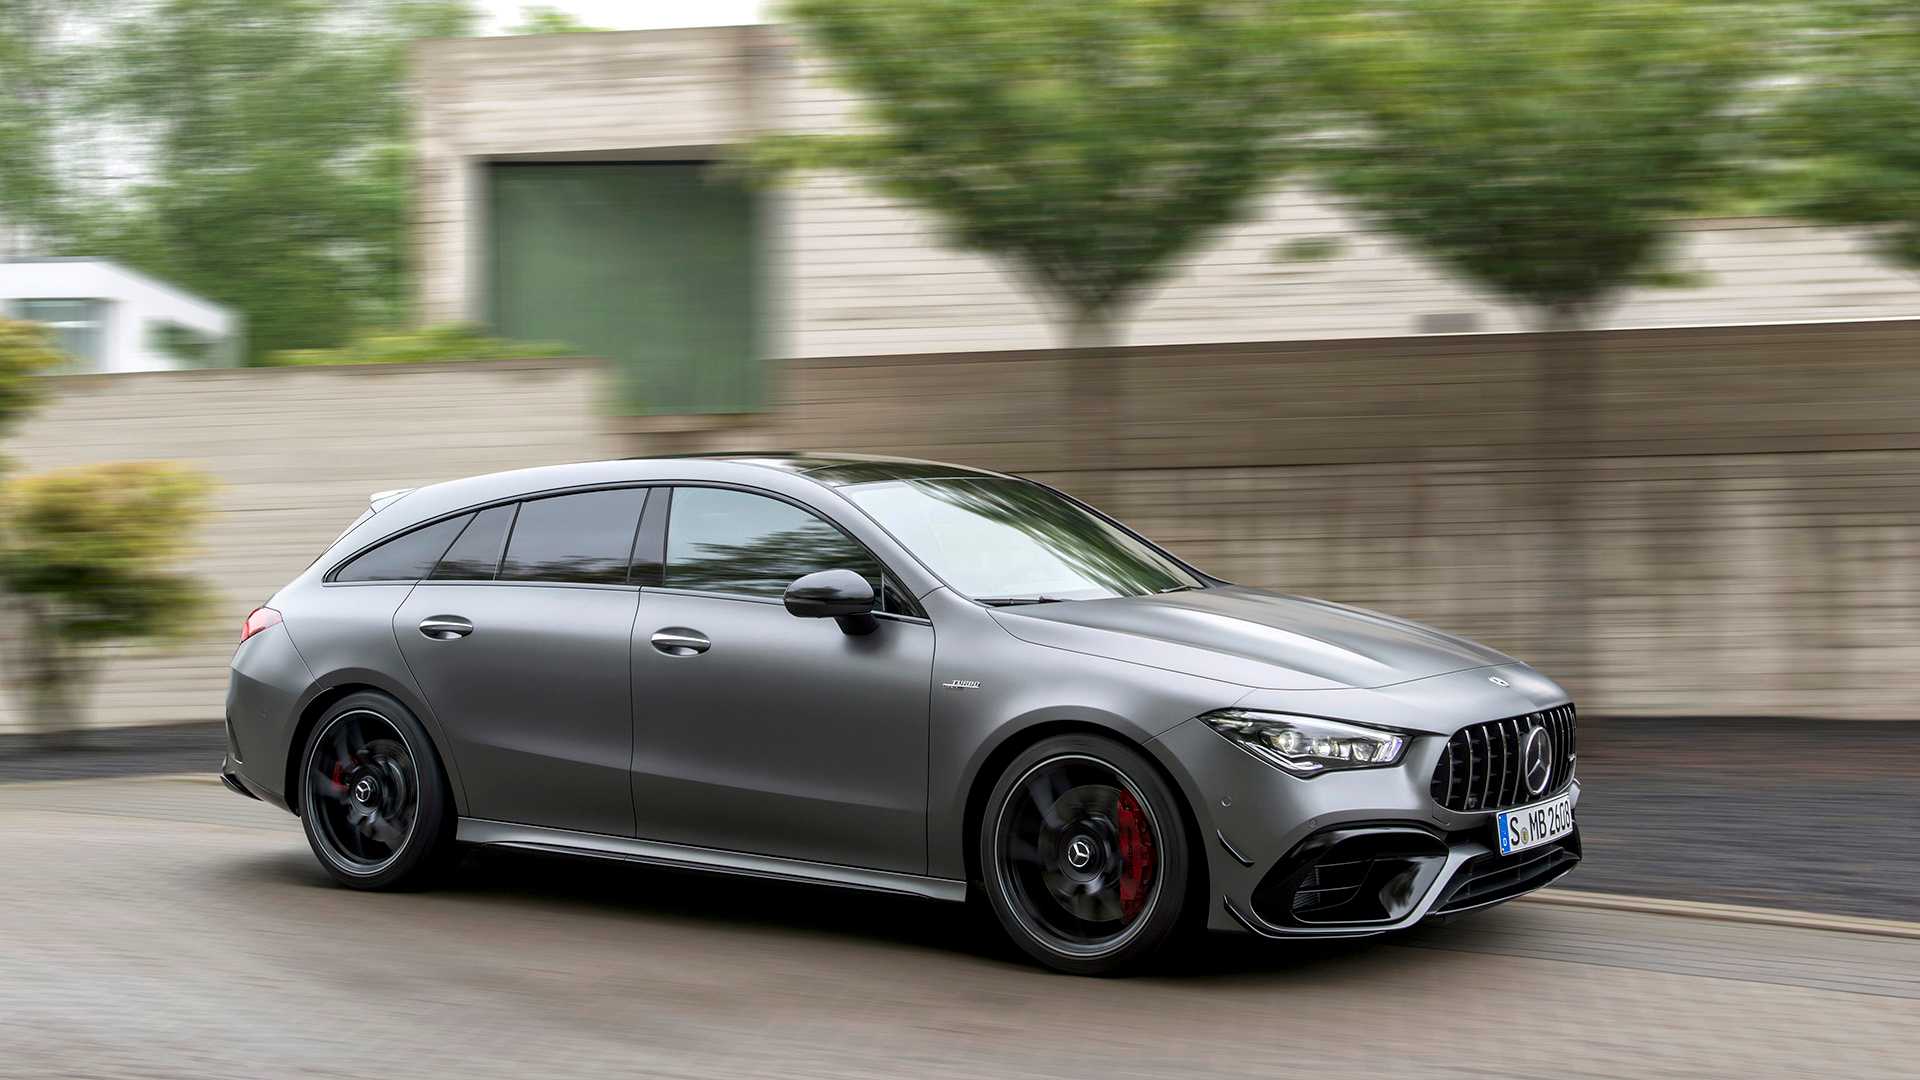 2020 Mercedes-AMG CLA 45 S 4MATIC+ Shooting Brake Front Three-Quarter Wallpapers (9)